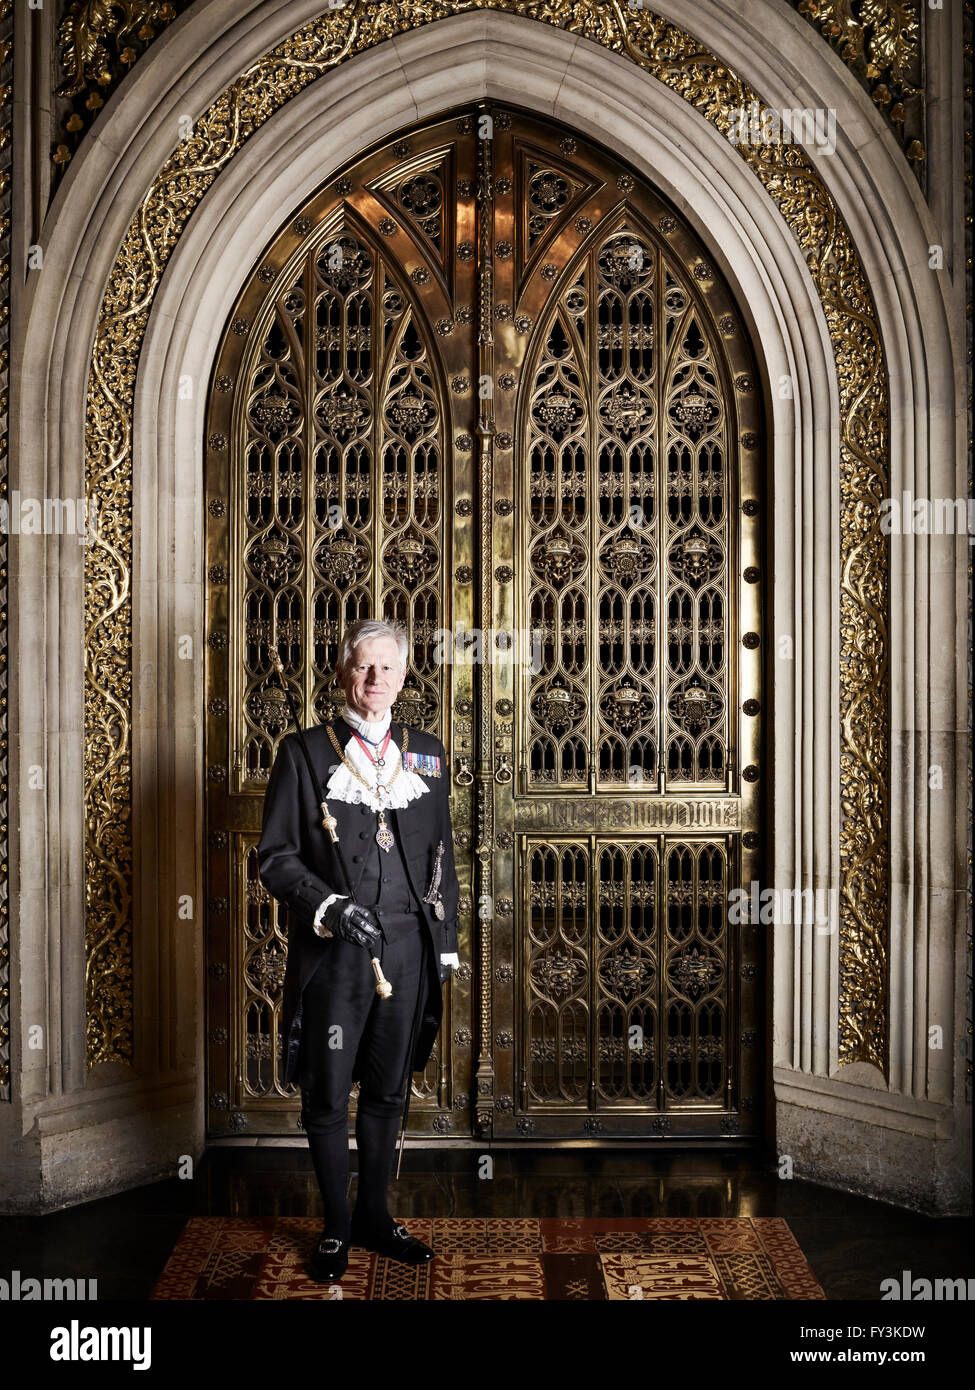 Lieutenant General David Leakey, Gentleman Usher of the Black Rod, in the House of Lords, London, March 2016. Stock Photo